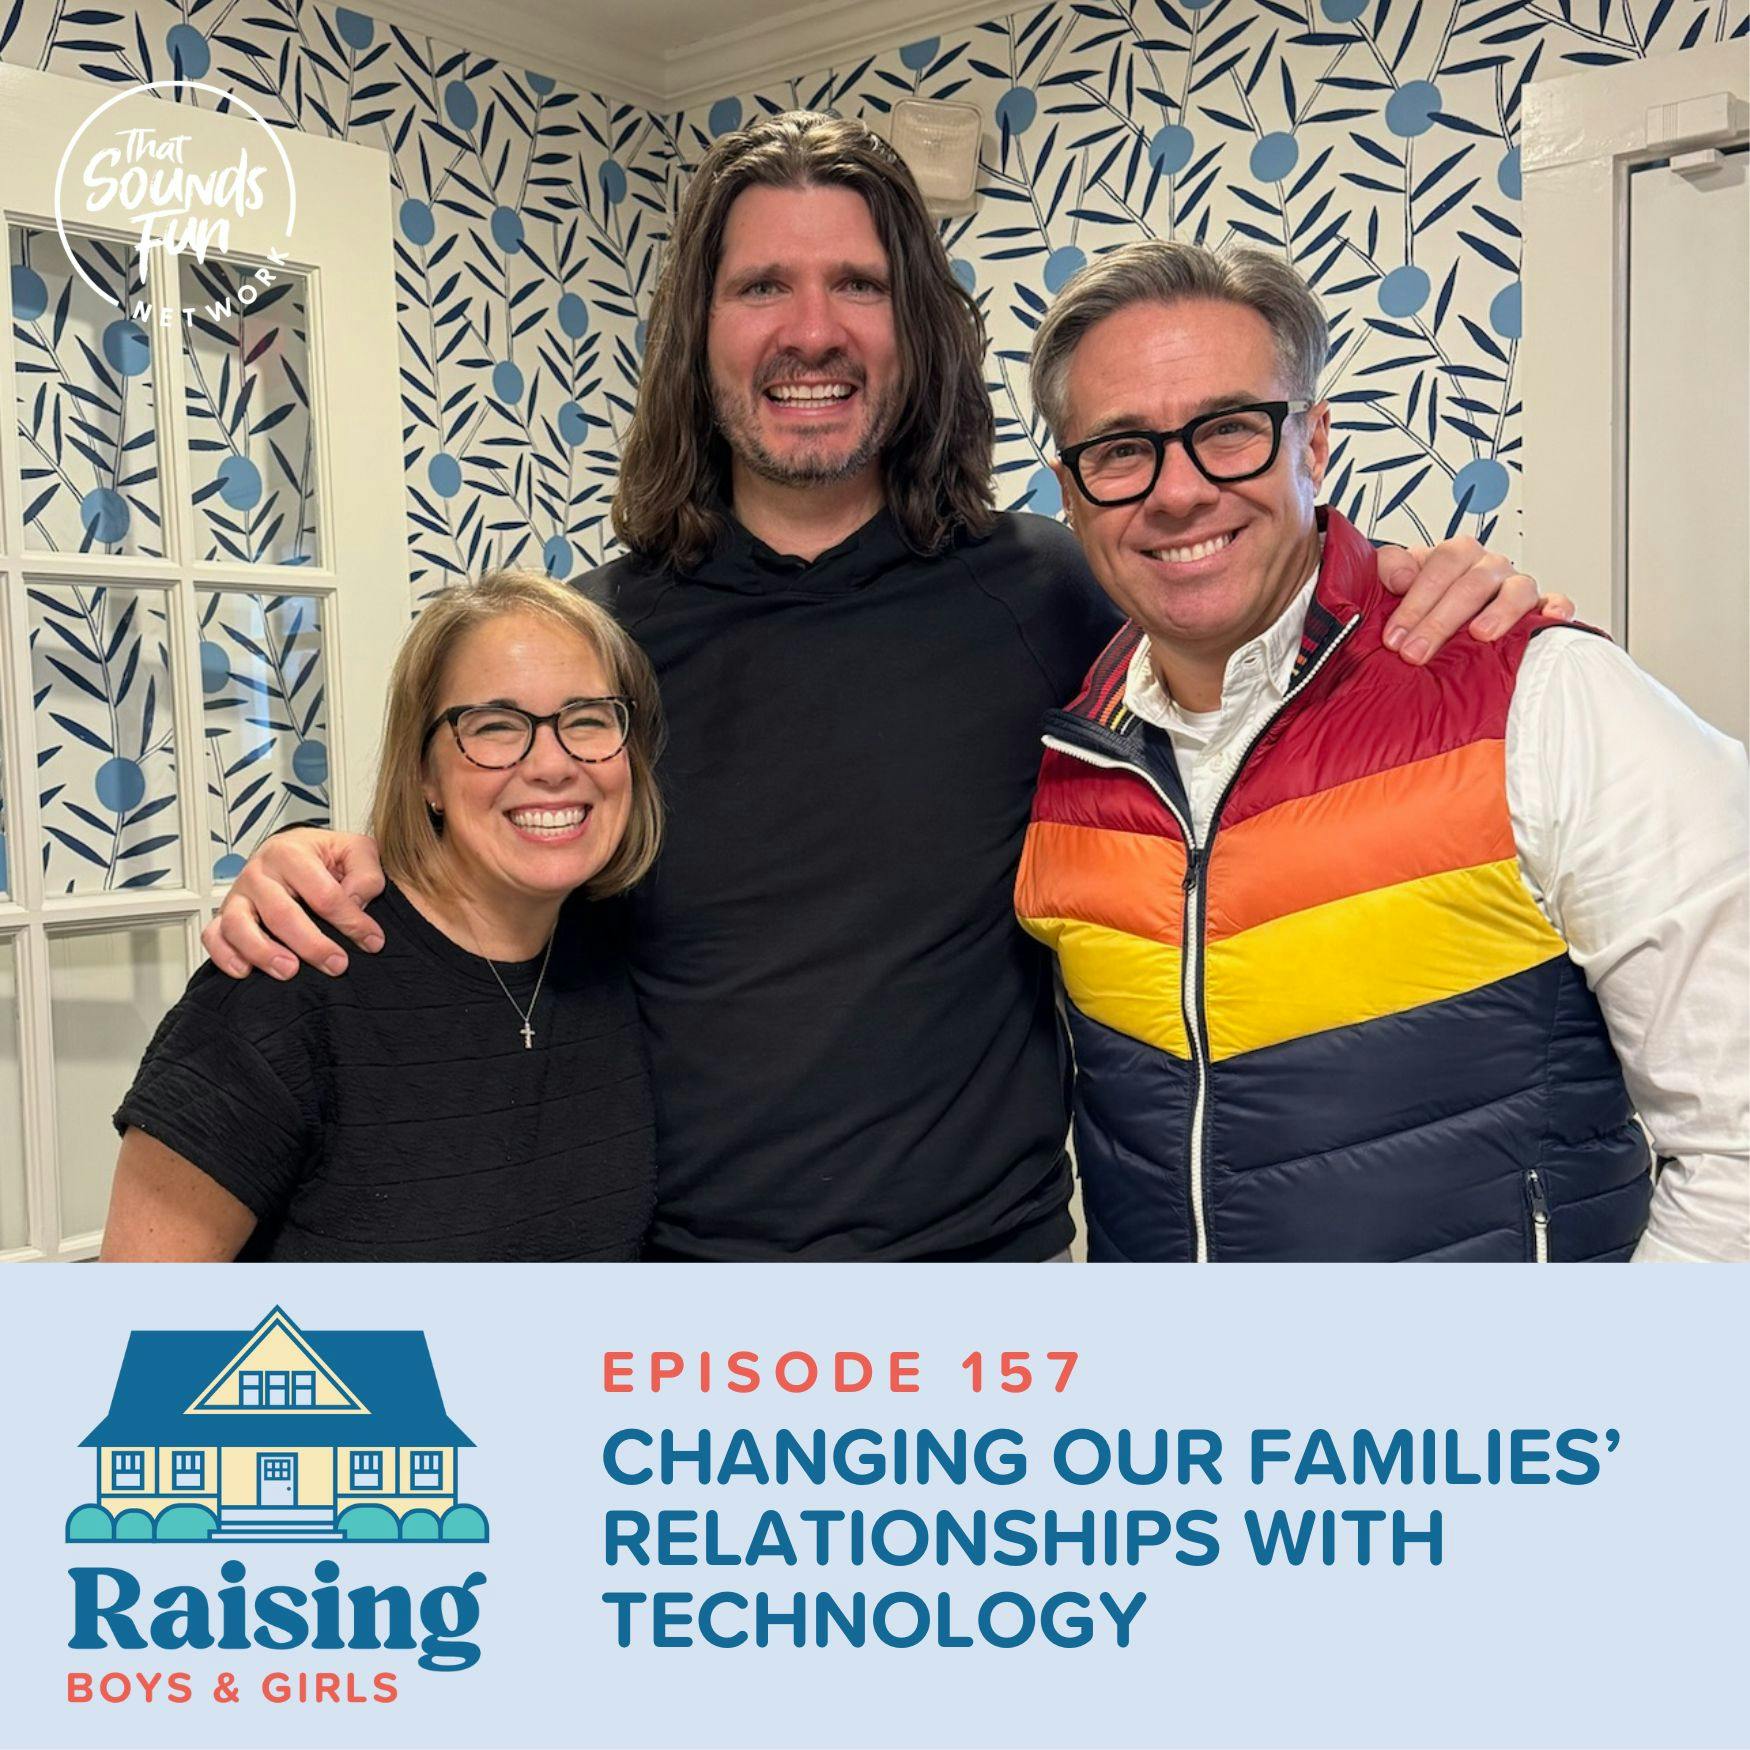 Episode 157: Changing Our Families’ Relationships with Technology